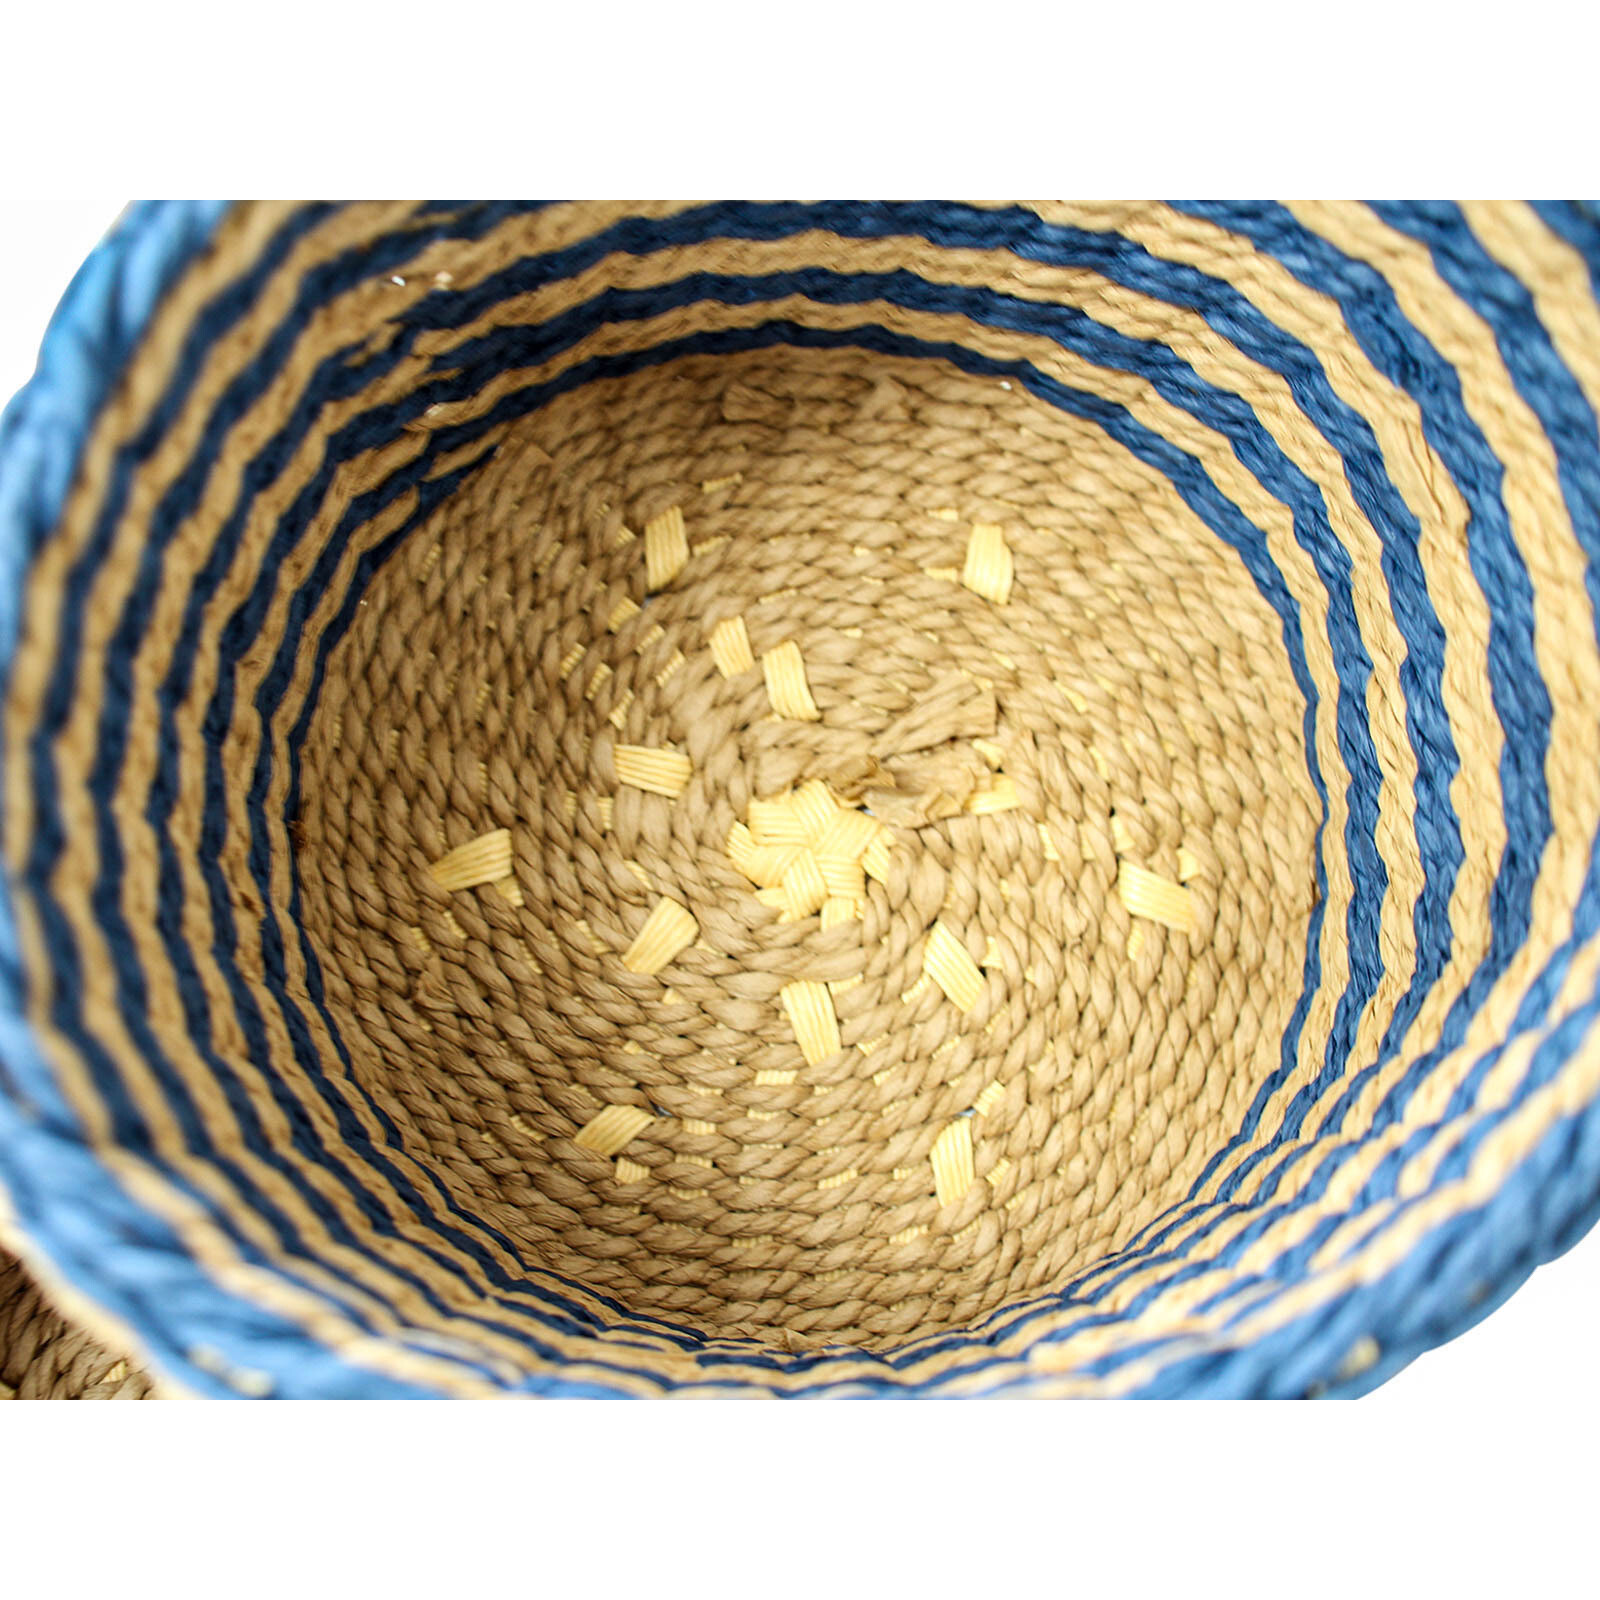 Woven Tidy Baskets S/2 Navy/Natural